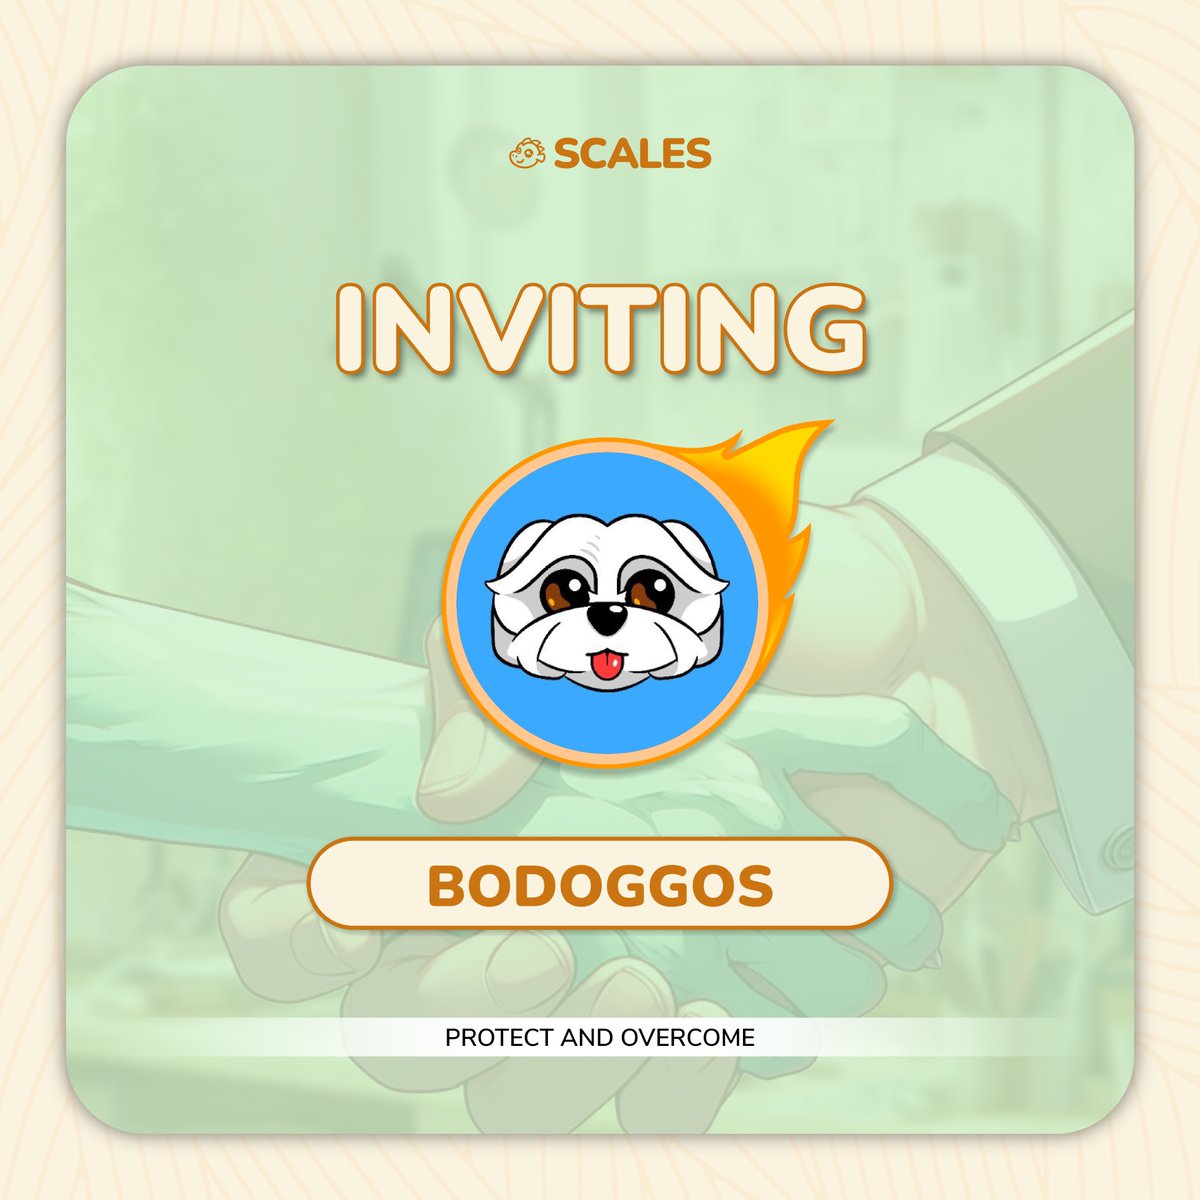 We would like to formally invite the @BoDoggosNFT community to join SCALES on our ventures in wallet security💚 Join our Discord now to get Protected and secure your $SCALES airdrop